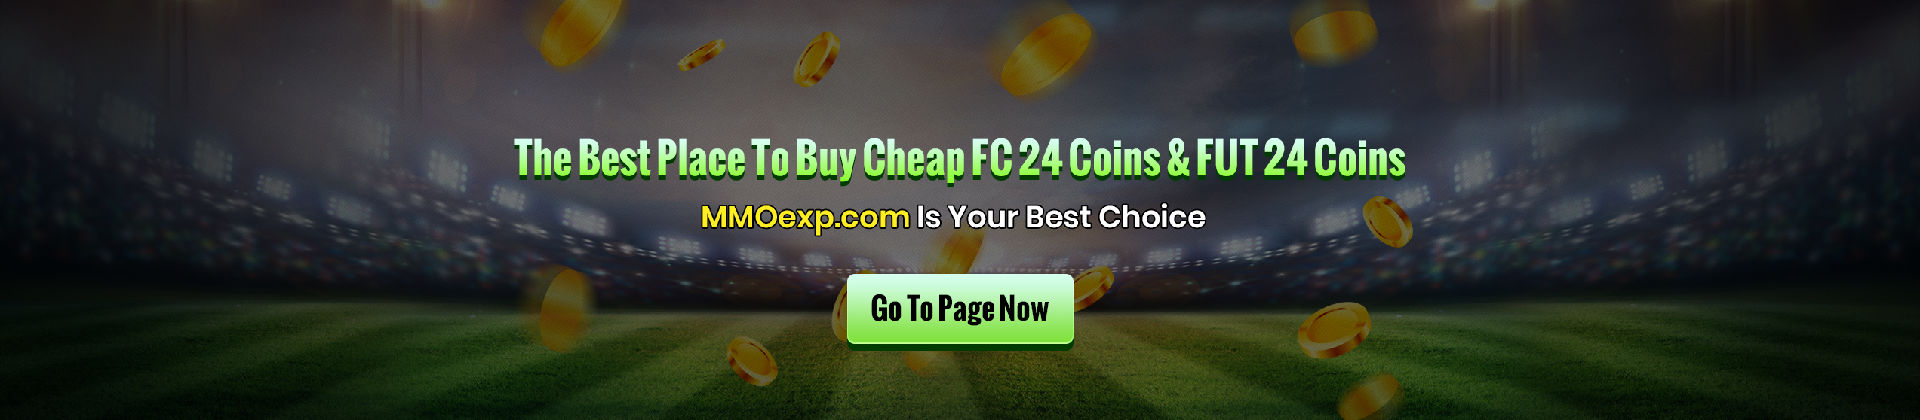 The Best Place To Buy Cheap FC 24 Coins & FUT 24 C